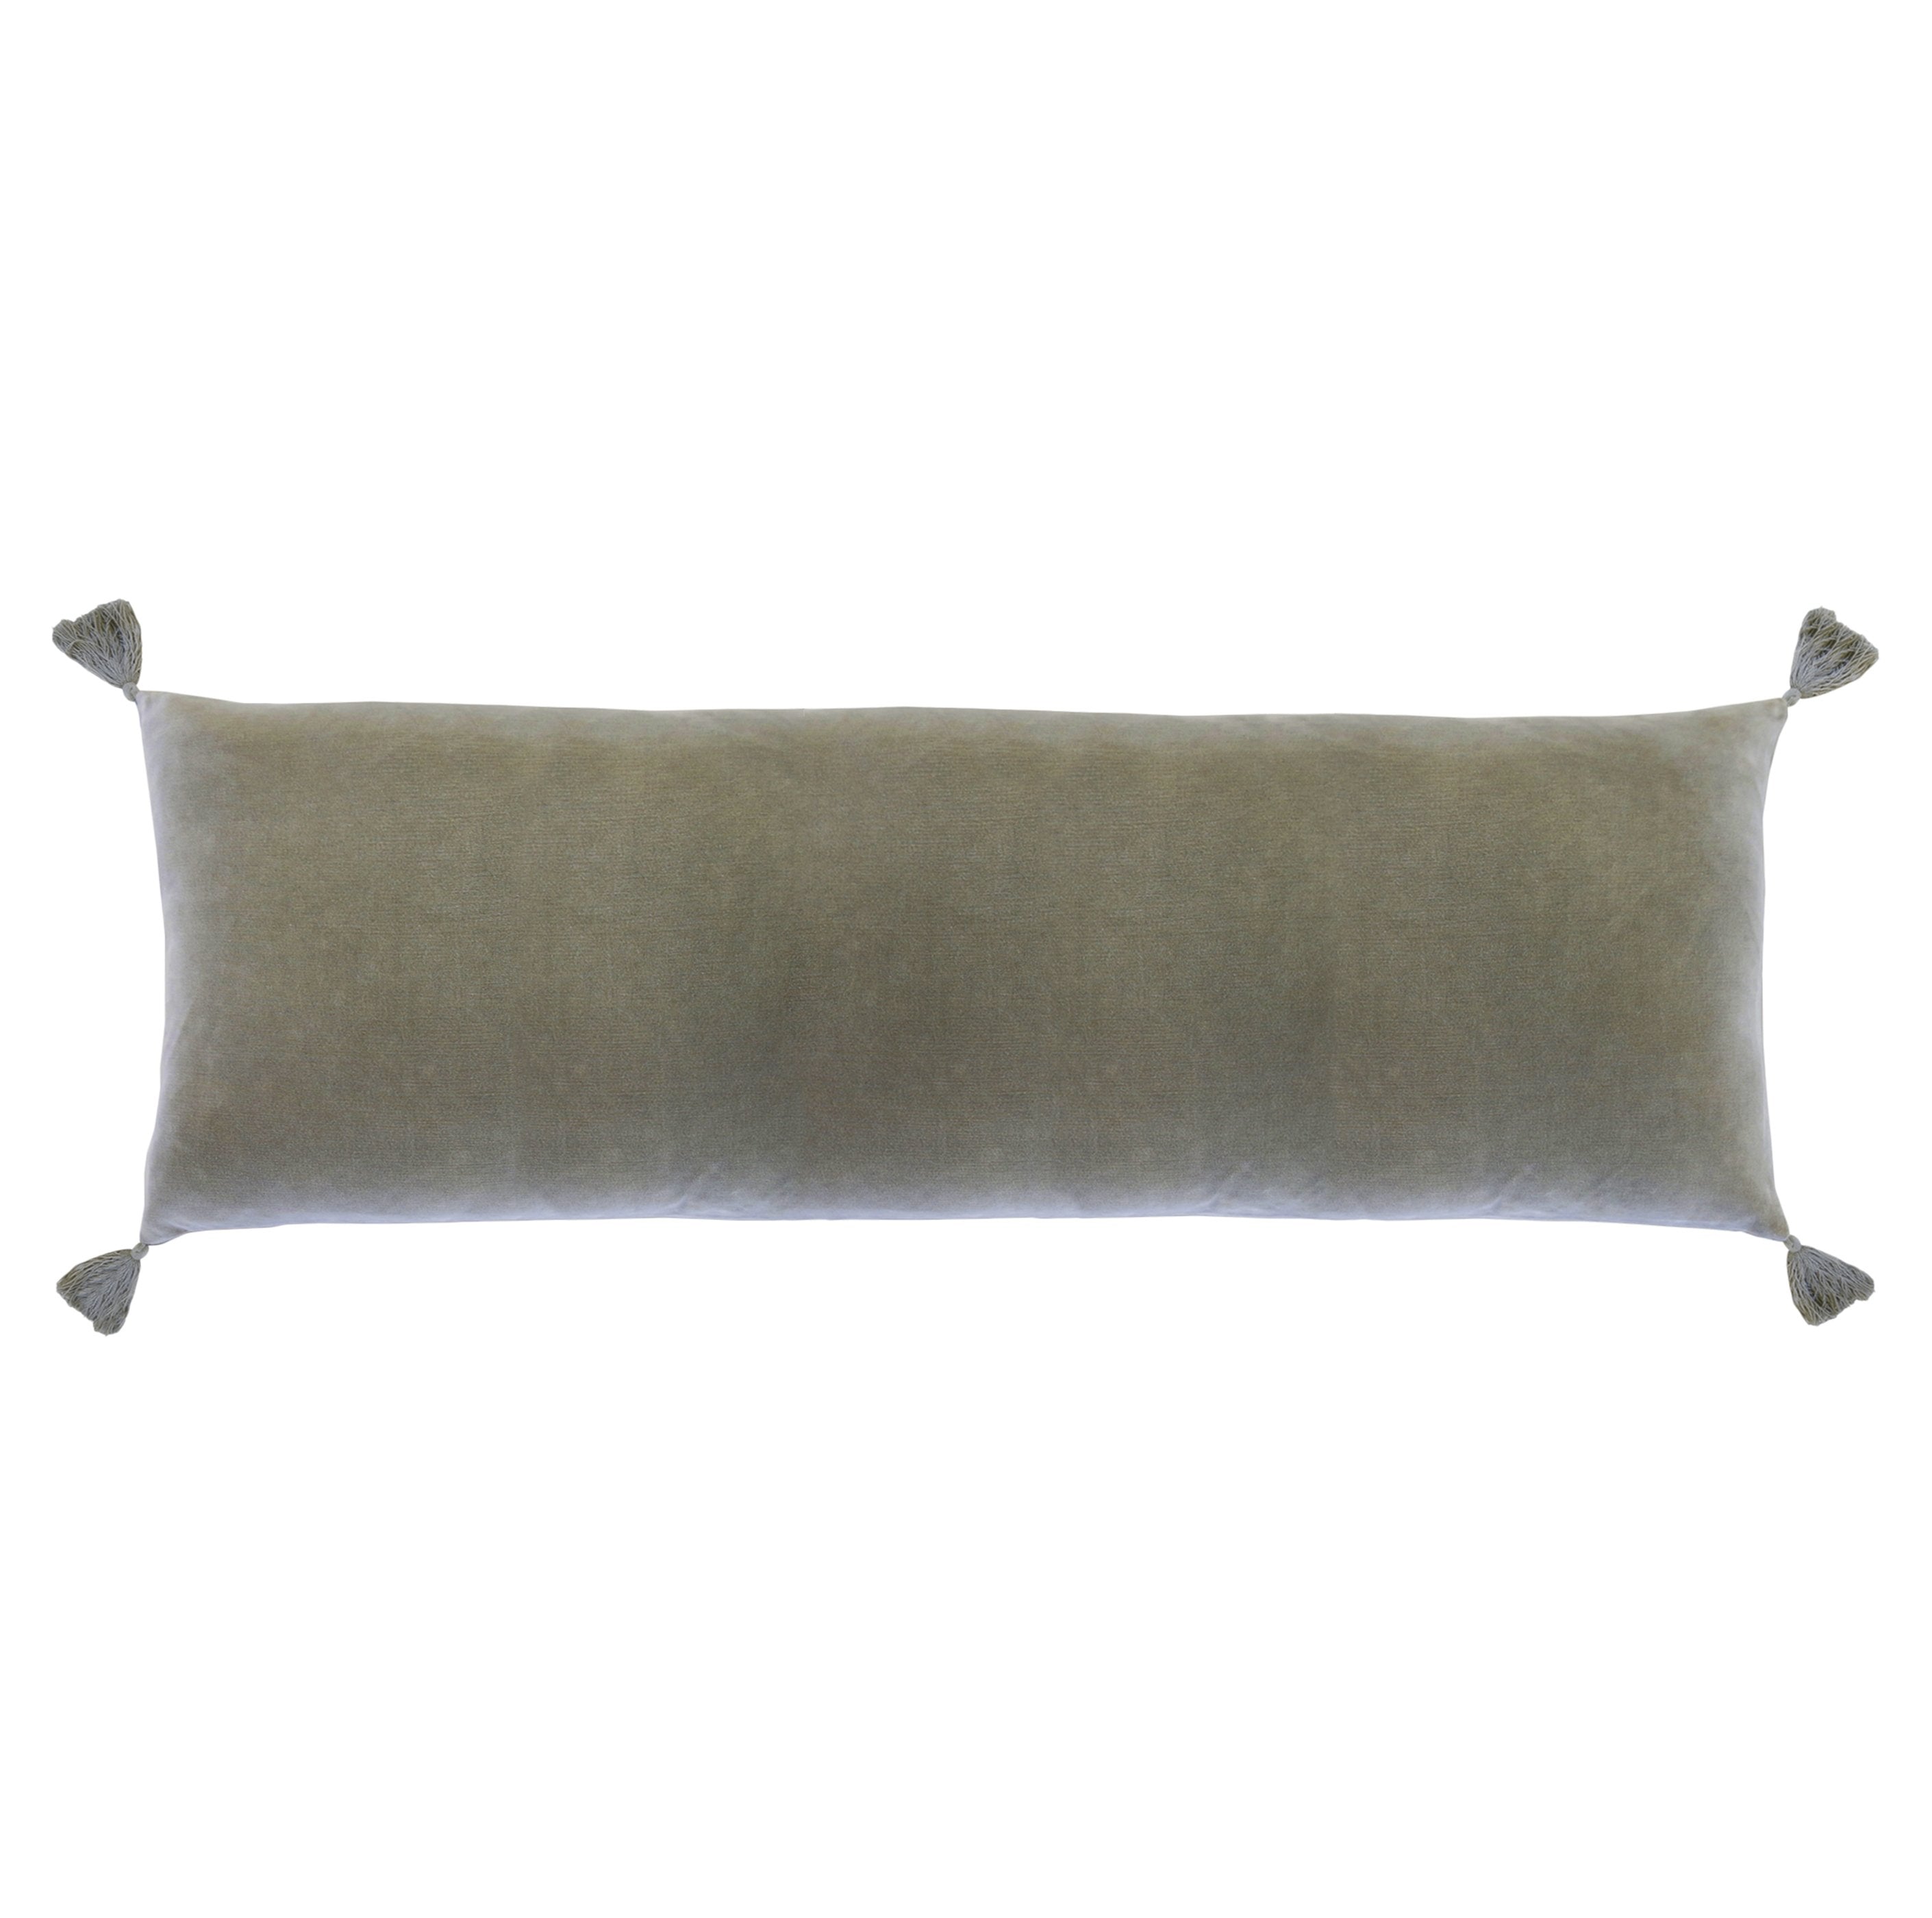 Bianca 14"x40" Pillow with Insert - Sage Color -Pom Pom at Home